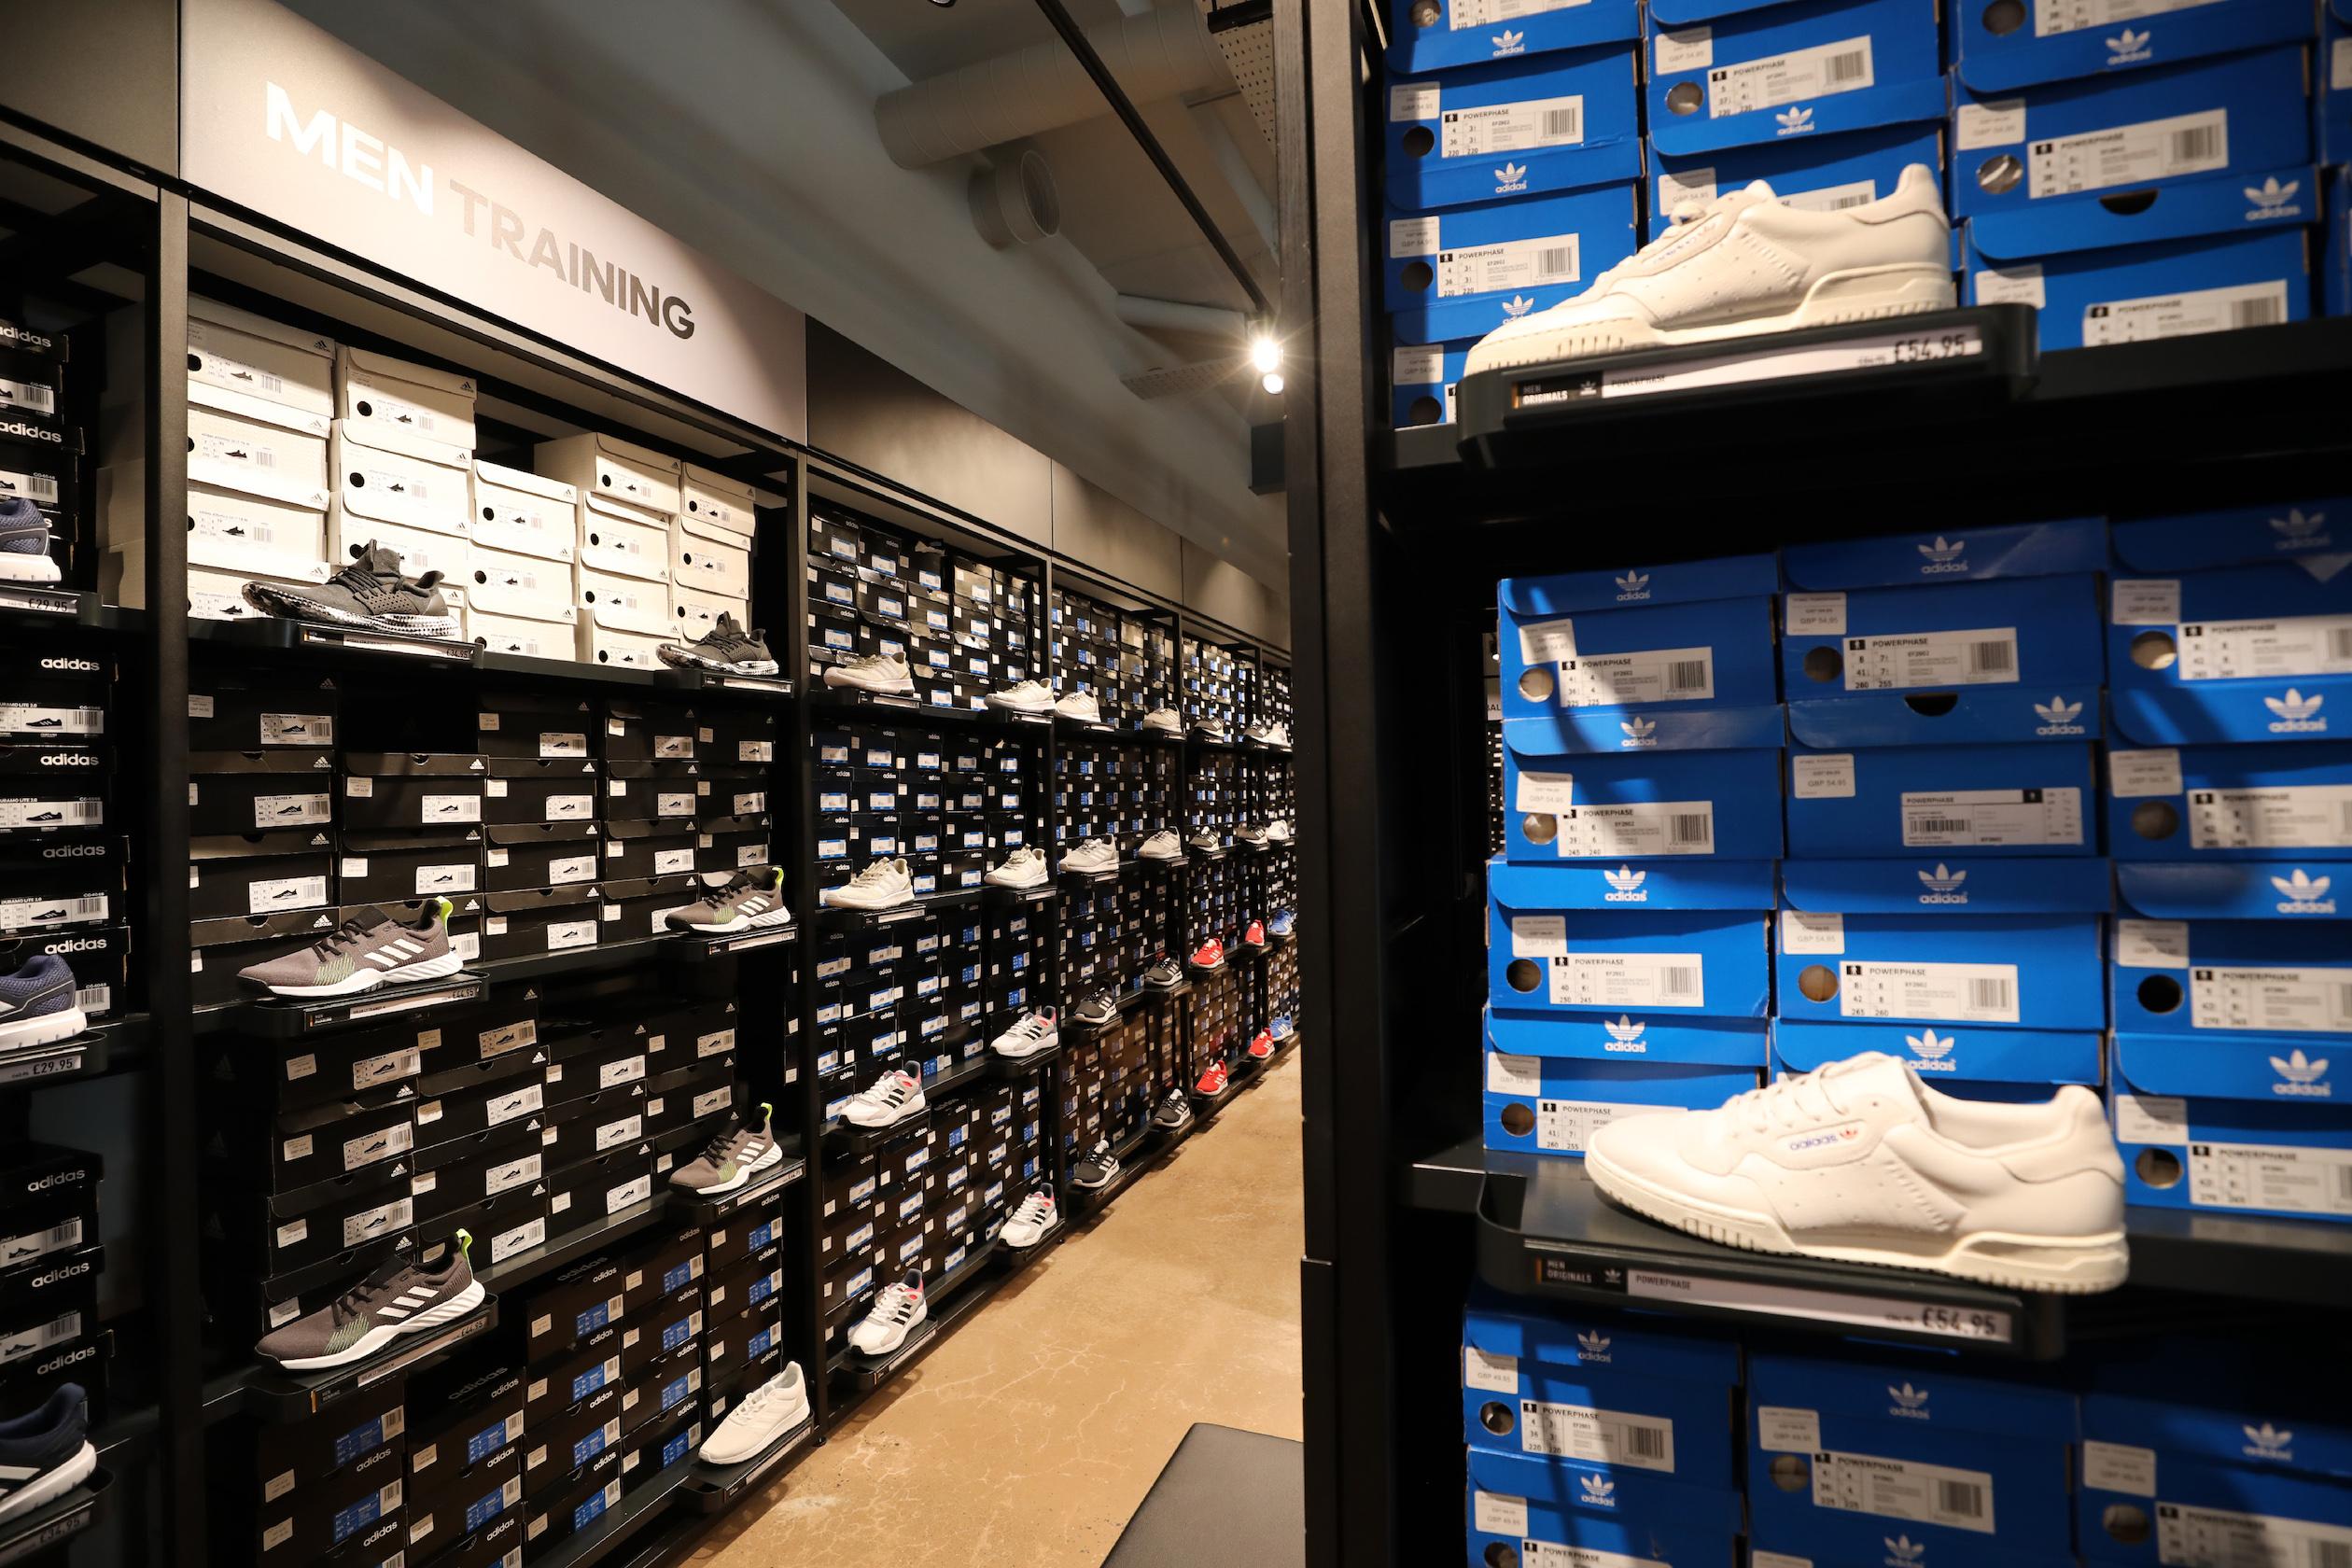 adidas store outlet